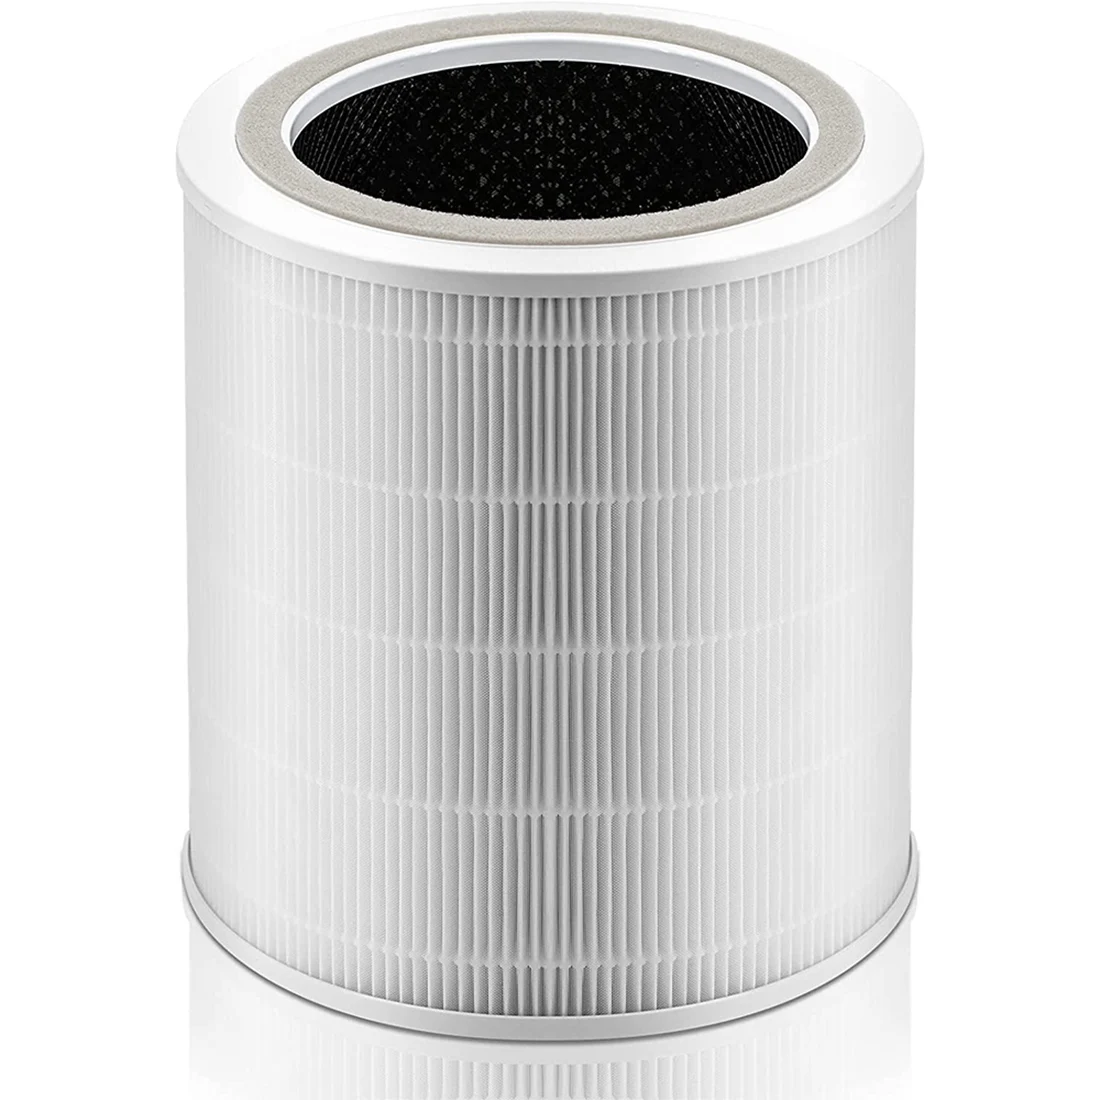 

Replacement Filter for Levoit Core 400S 400S-RF Air Purifier H13 True HEPA and Activated Carbon with Pre-Filter